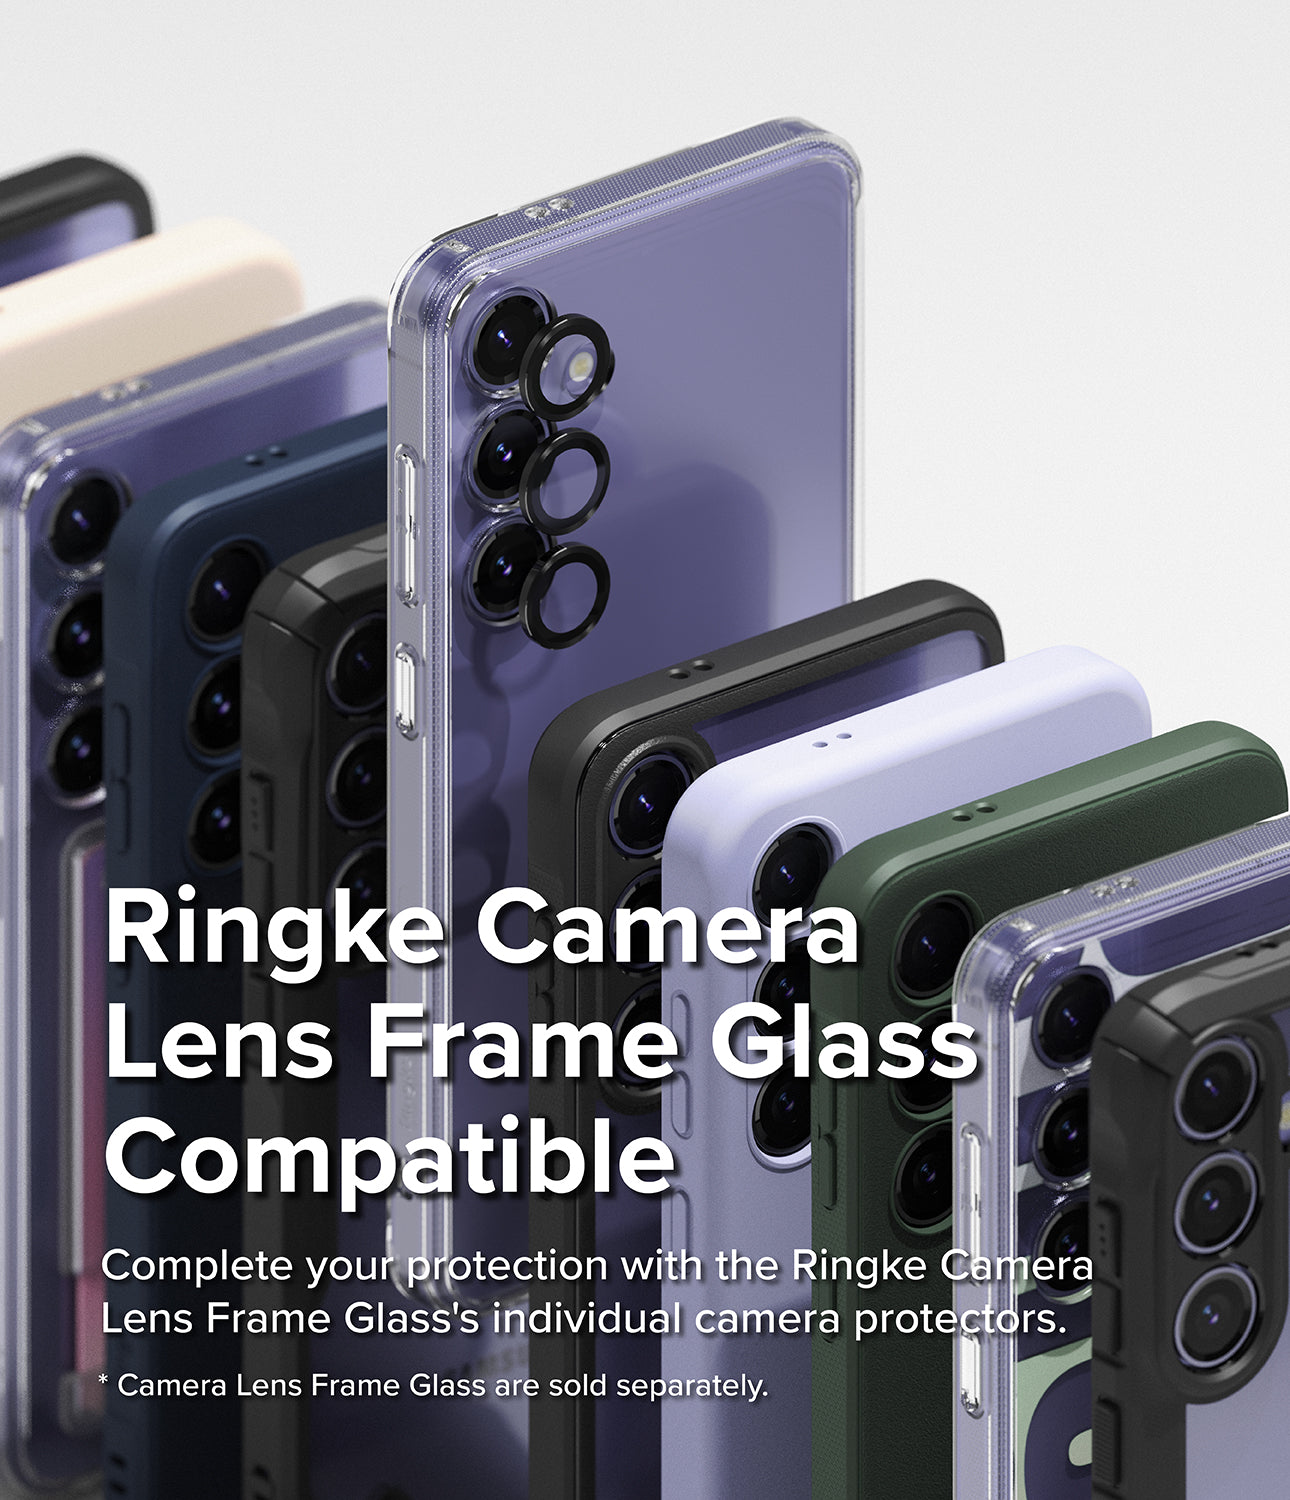 Galaxy S24 Plus Case | Fusion - Ringke Camera Lens Frame Glass Compatible. Complete your protection with the Ringke Camera Lens Frame Glass' individual camera protectors.